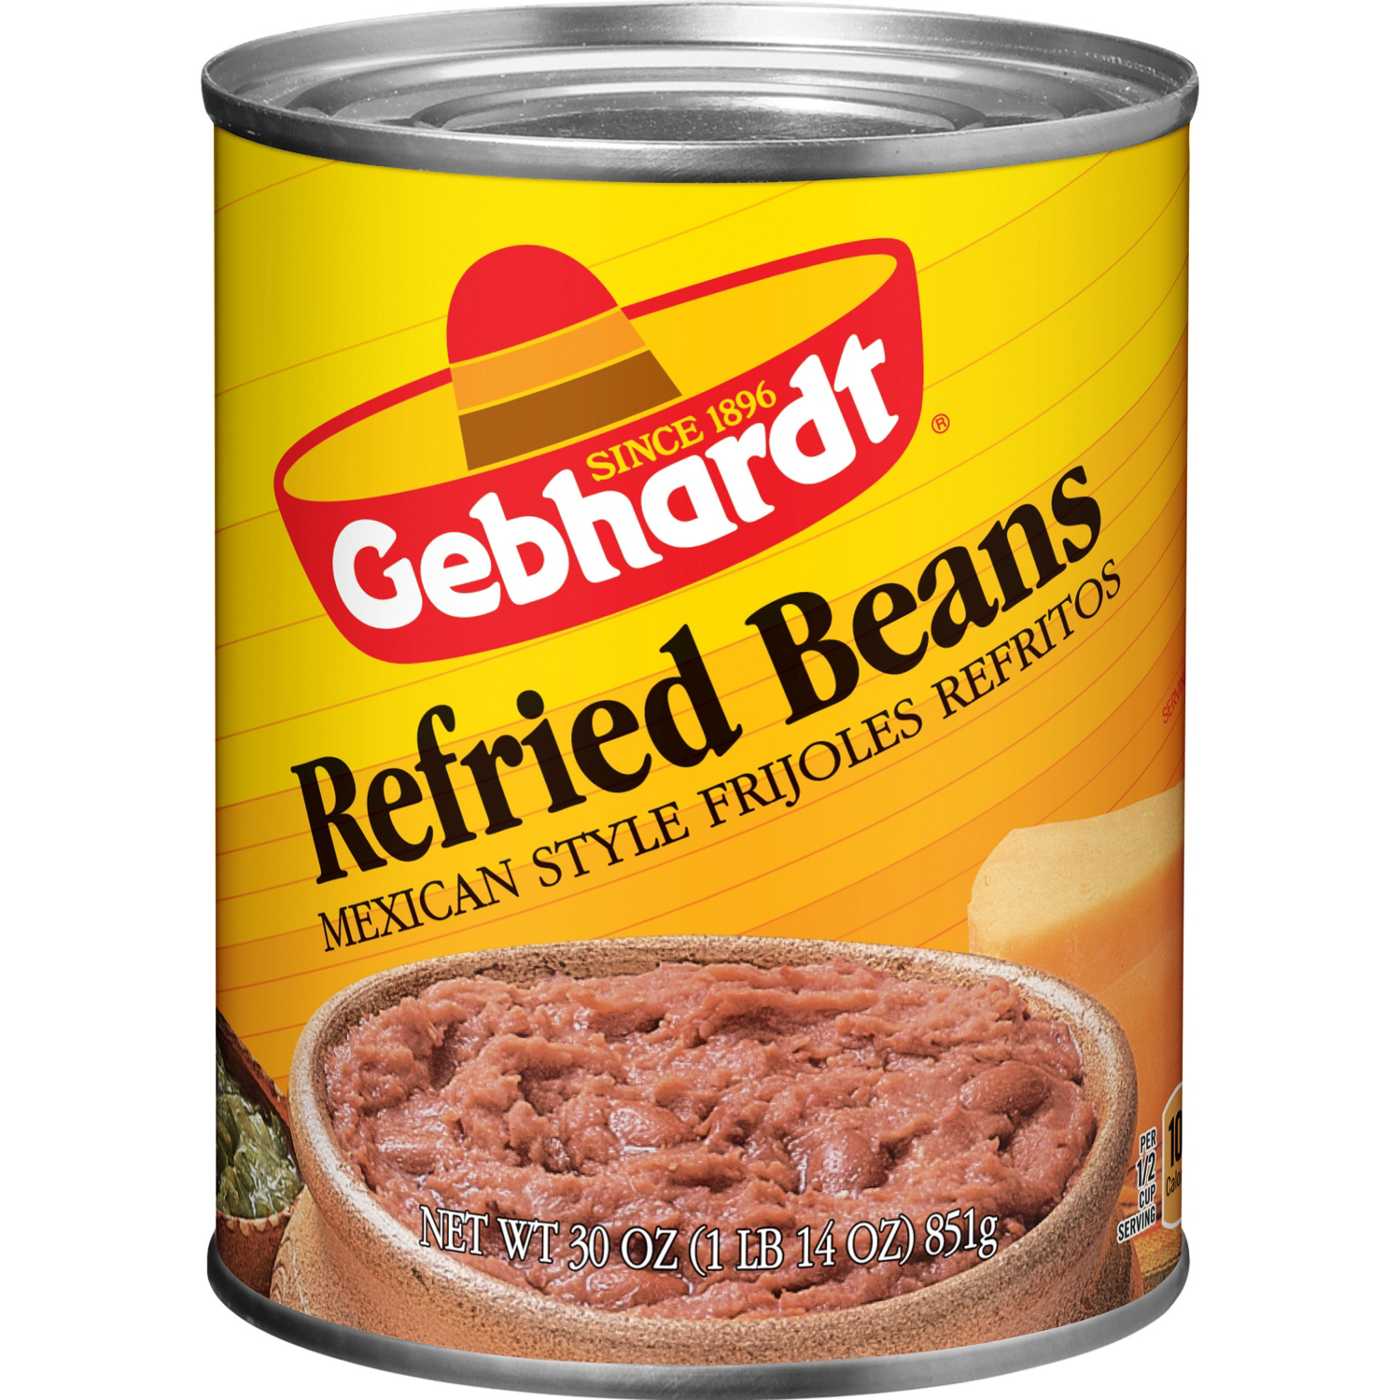 Gebhardt’s Mexican Style Refried Beans; image 1 of 3